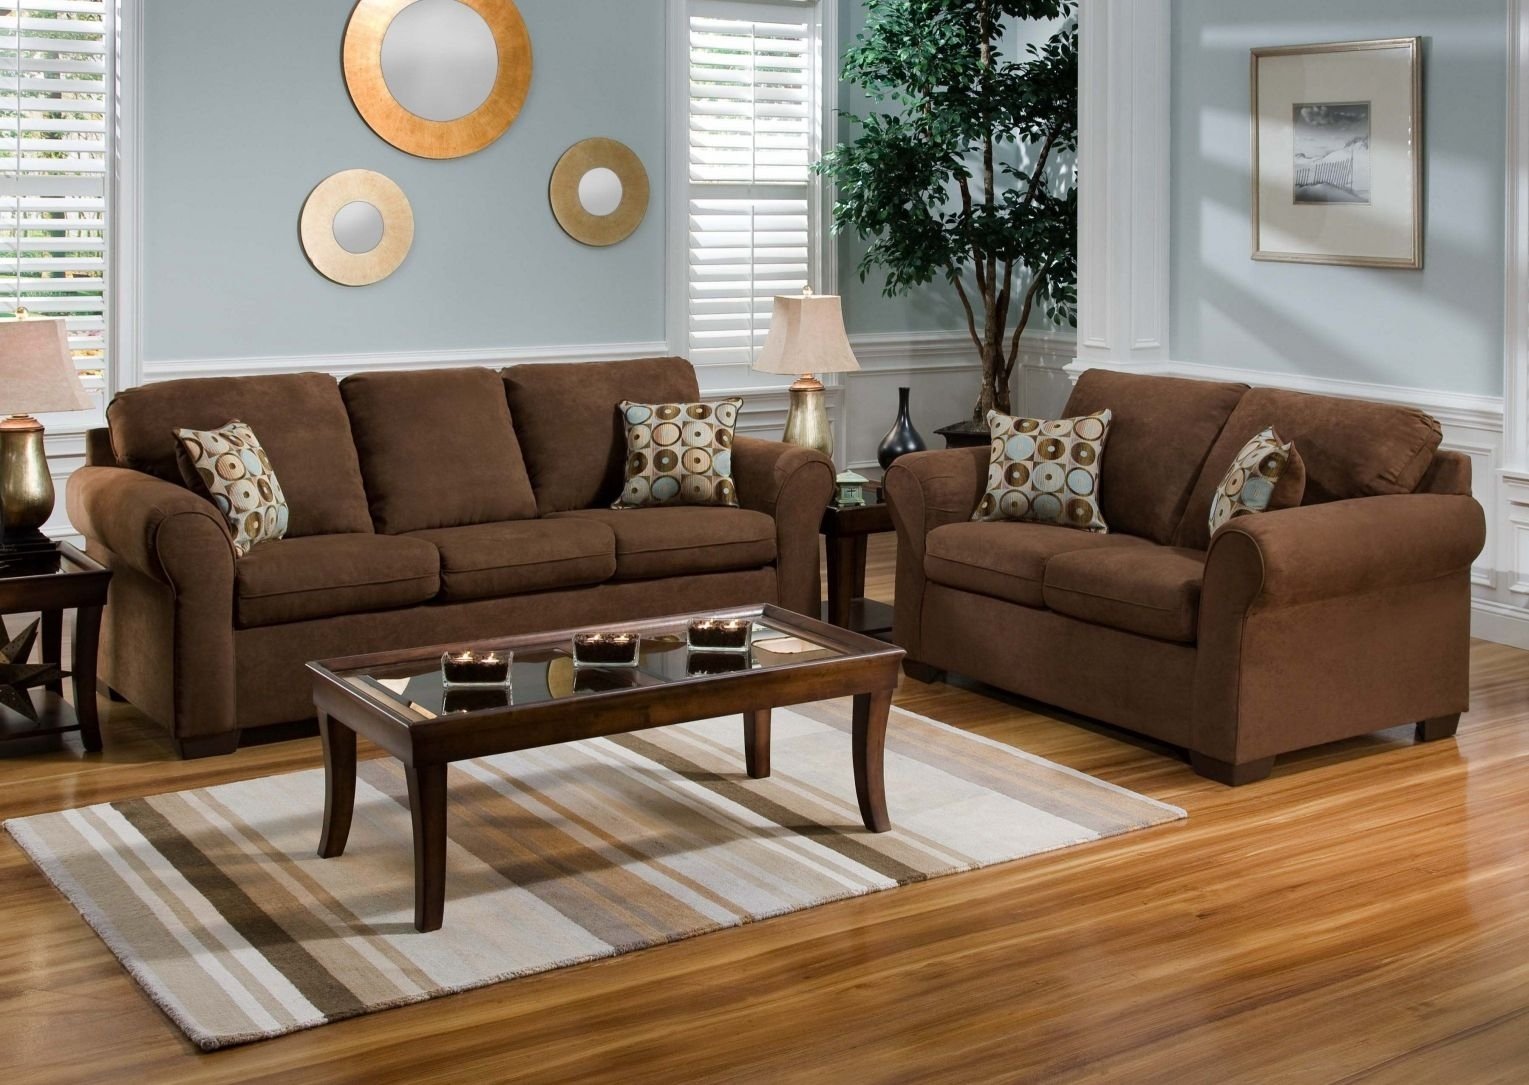 10 Awesome Brown Couch Living Room Ideas inspiring living room brilliant light brown couch ideas dark pict of 2022